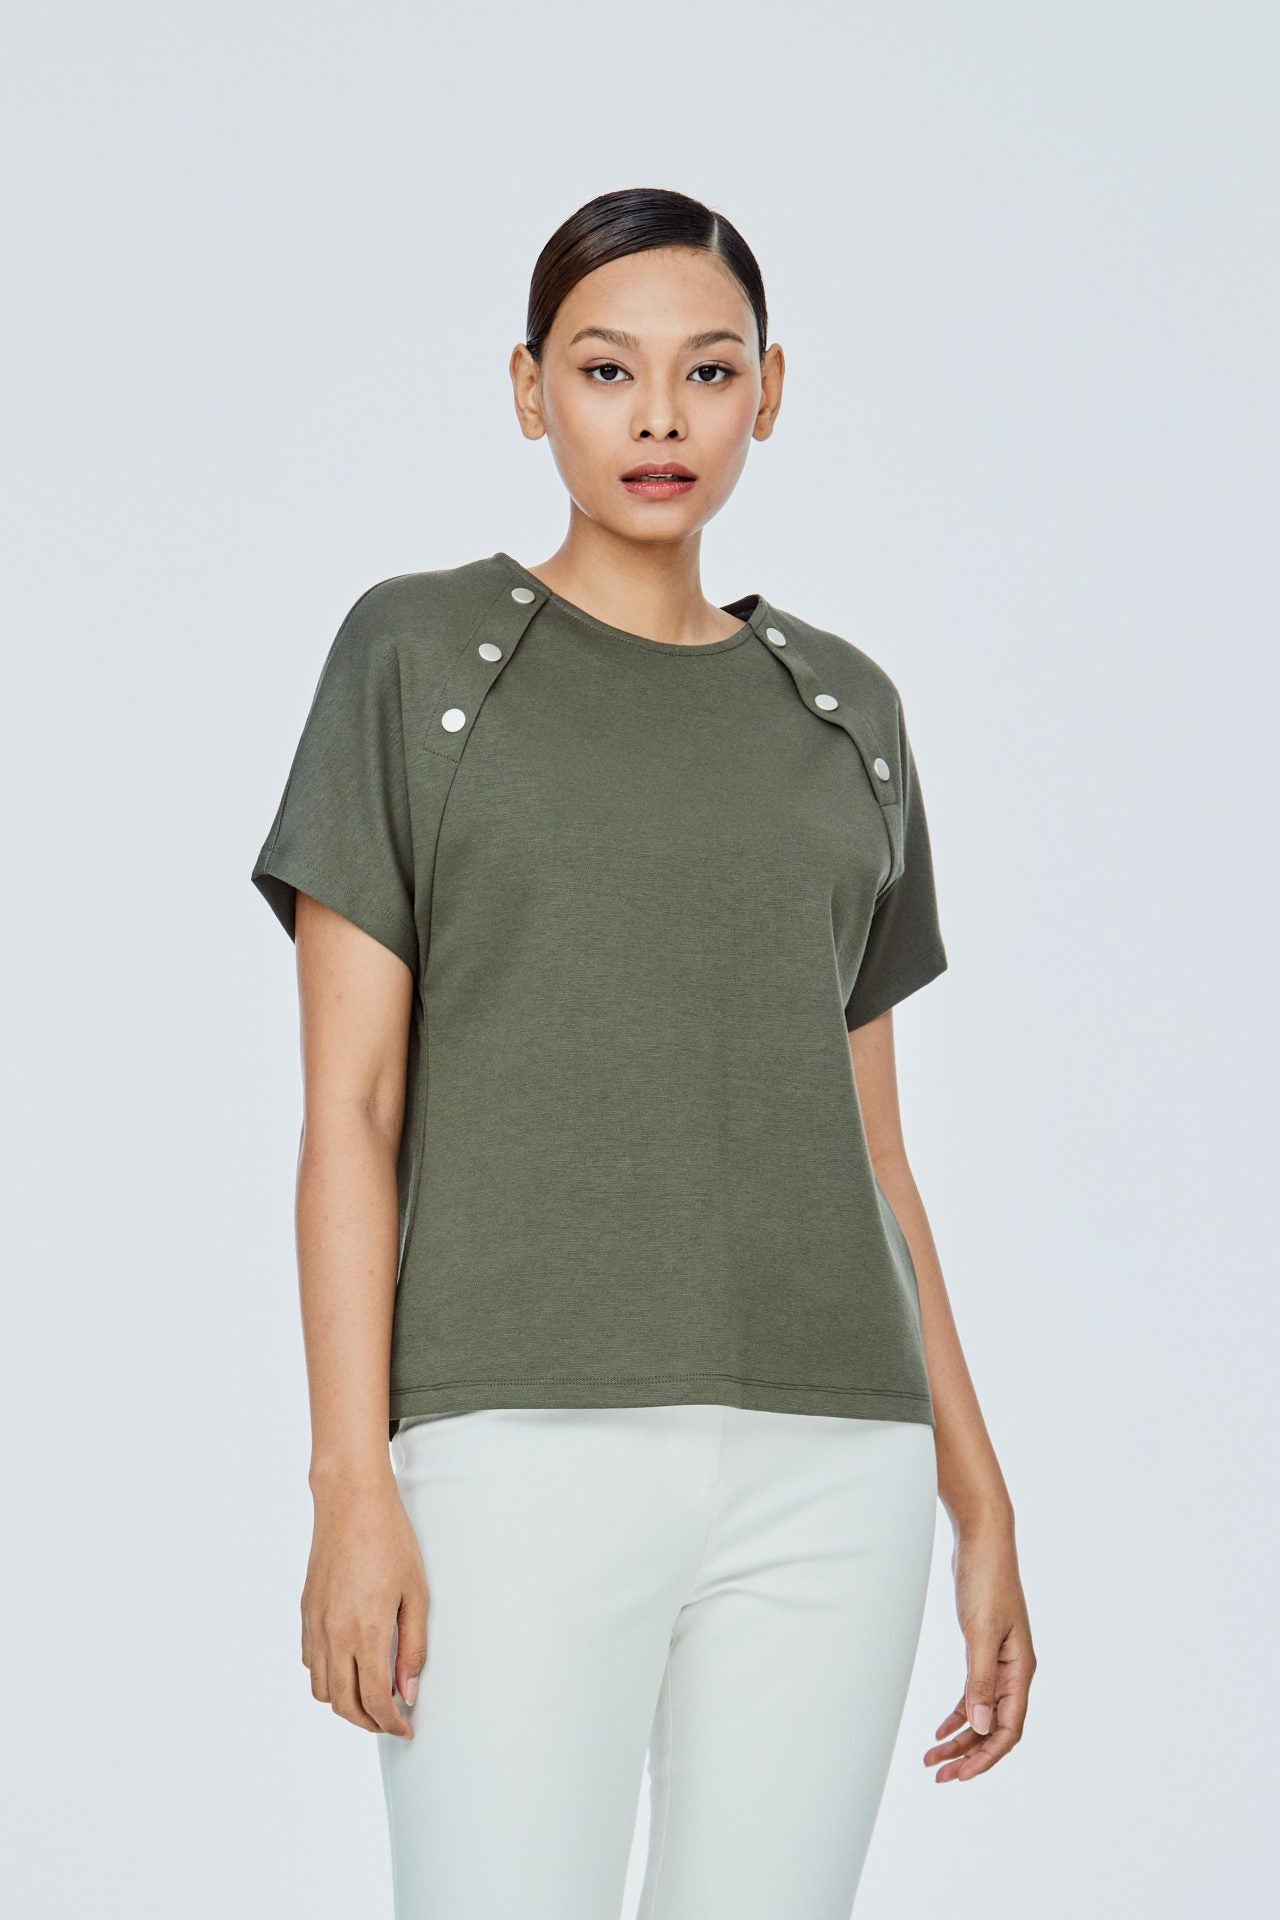 AT 9550 DECORATIVE BUTTON TOP ARMY GREEN